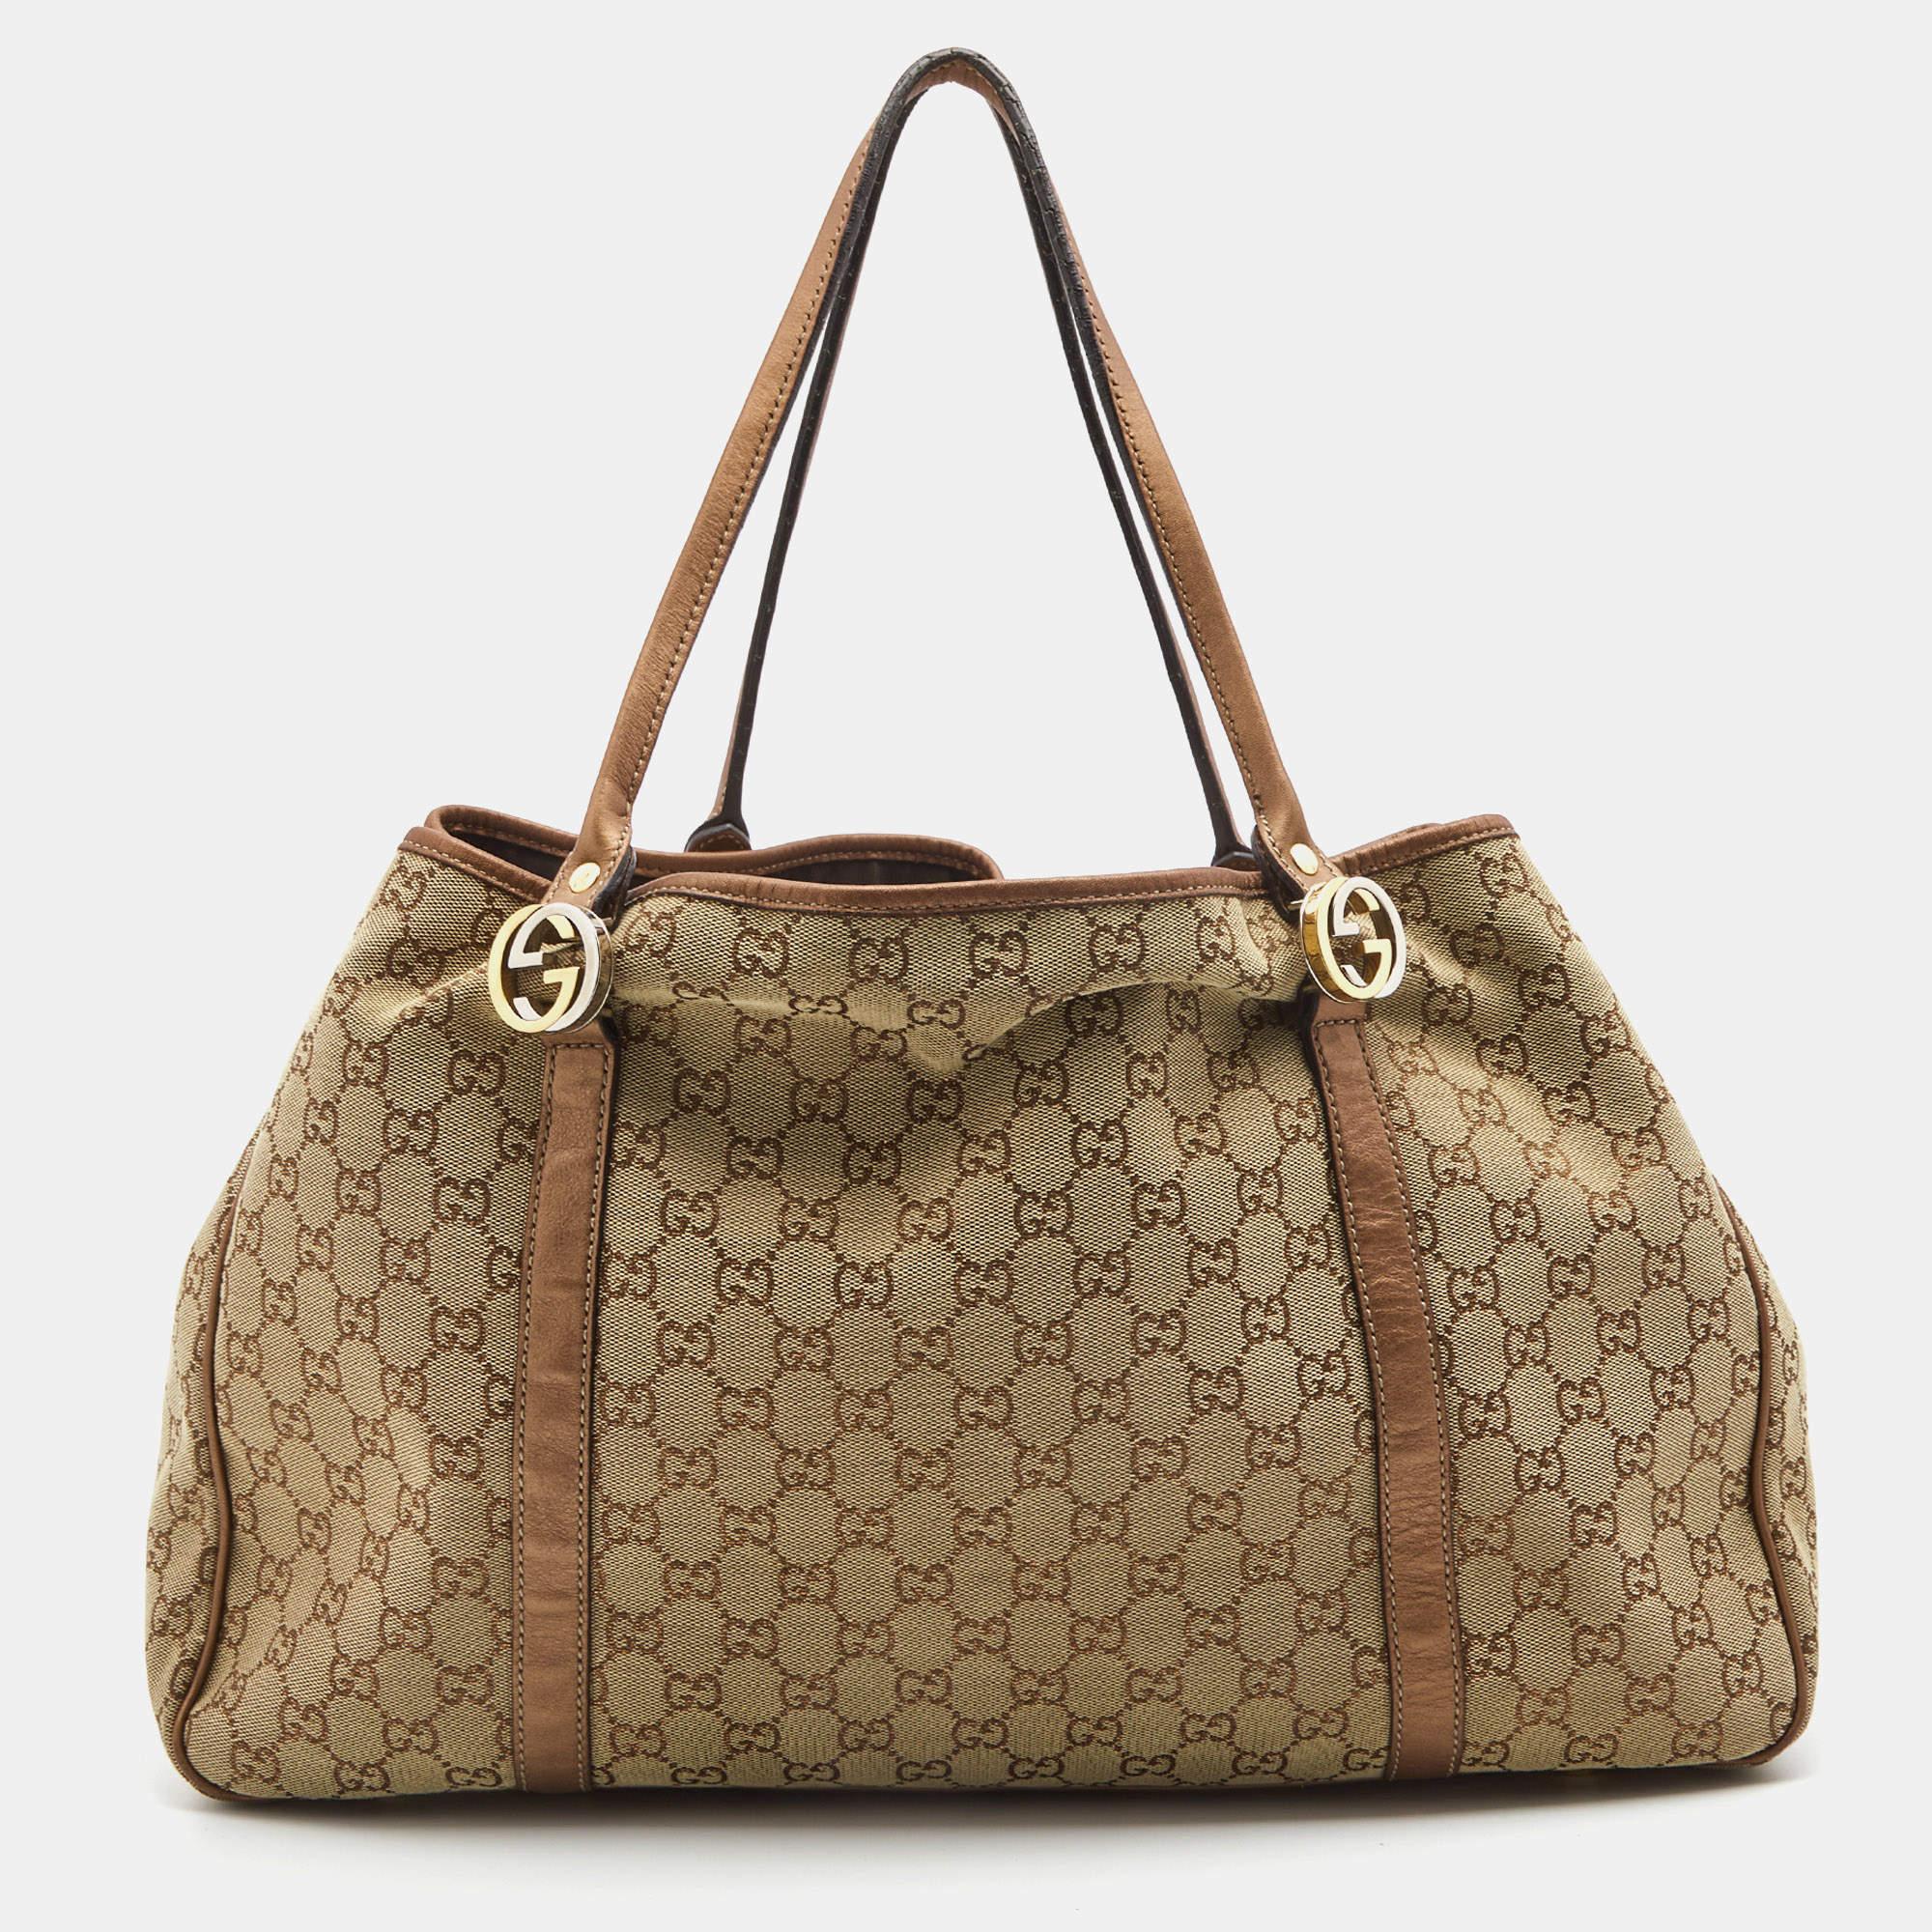 Durable and stylish, this GG twins tote from Gucci is worth the buy! It comes crafted from signature GG canvas and leather with dual handles that are detailed with the 'GG' logo. It has a spacious interior capable of carrying all your daily